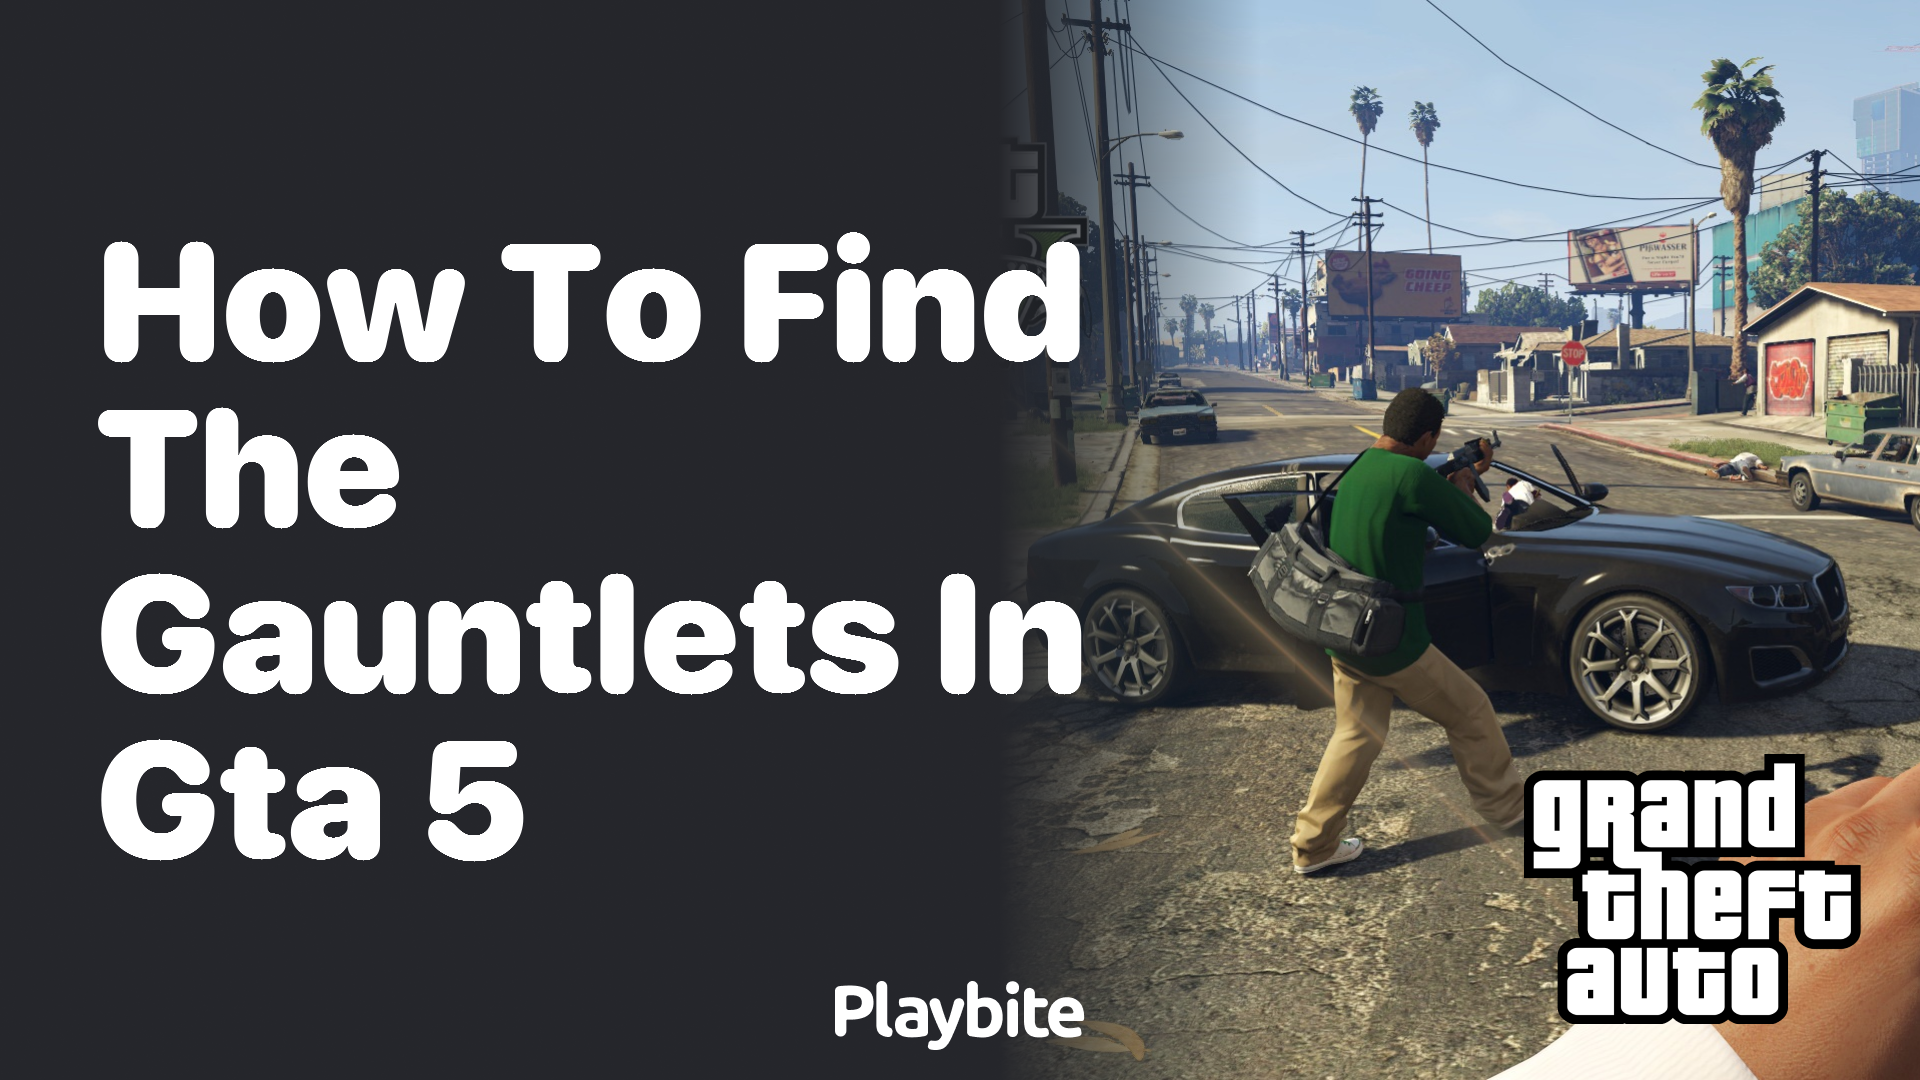 How to Find the Gauntlets in GTA 5